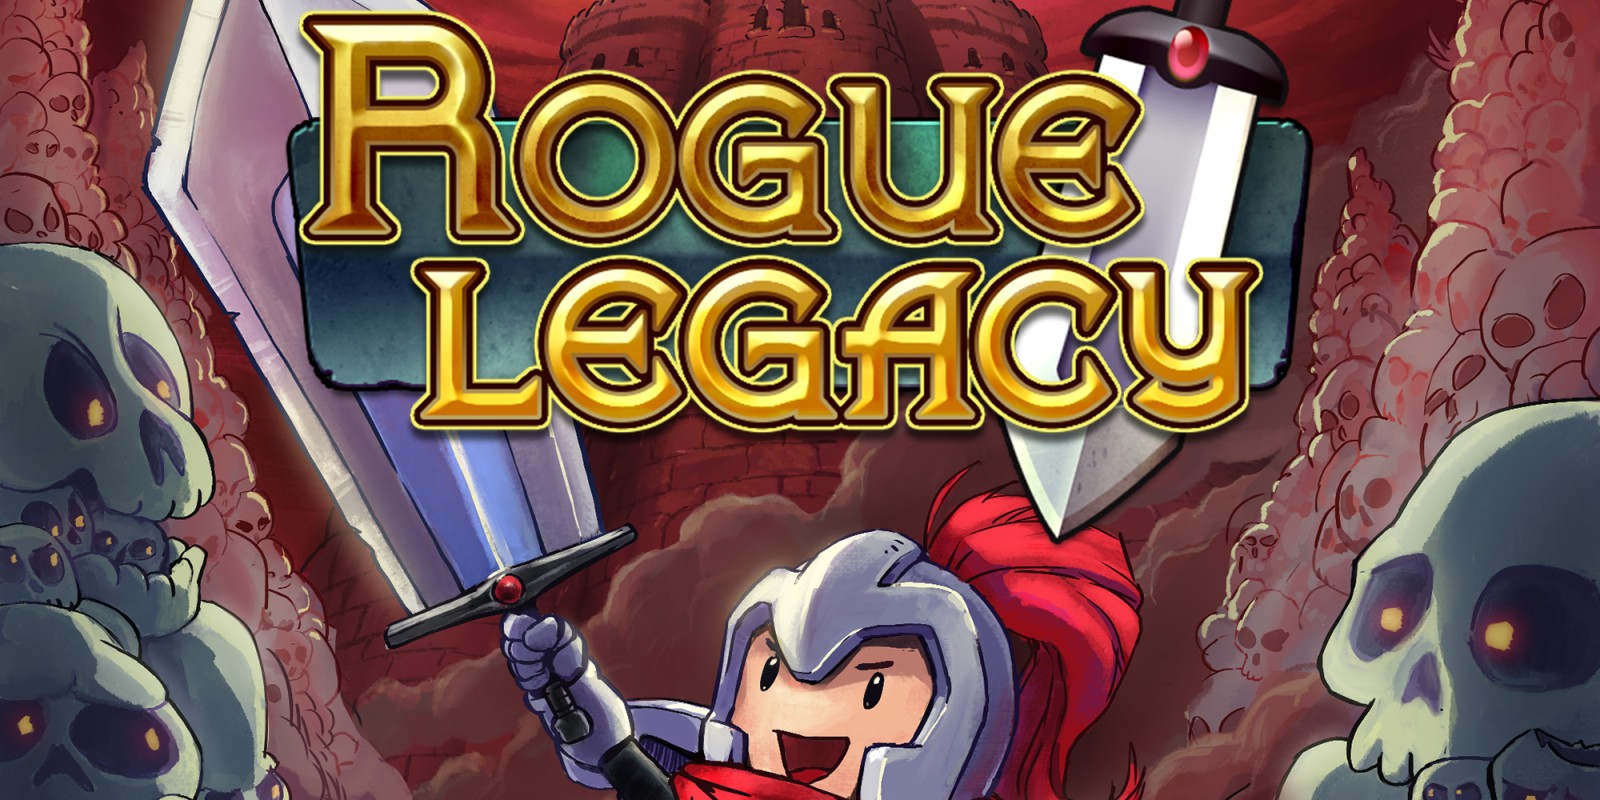 Rogue Legacy PC Download free full game for windows